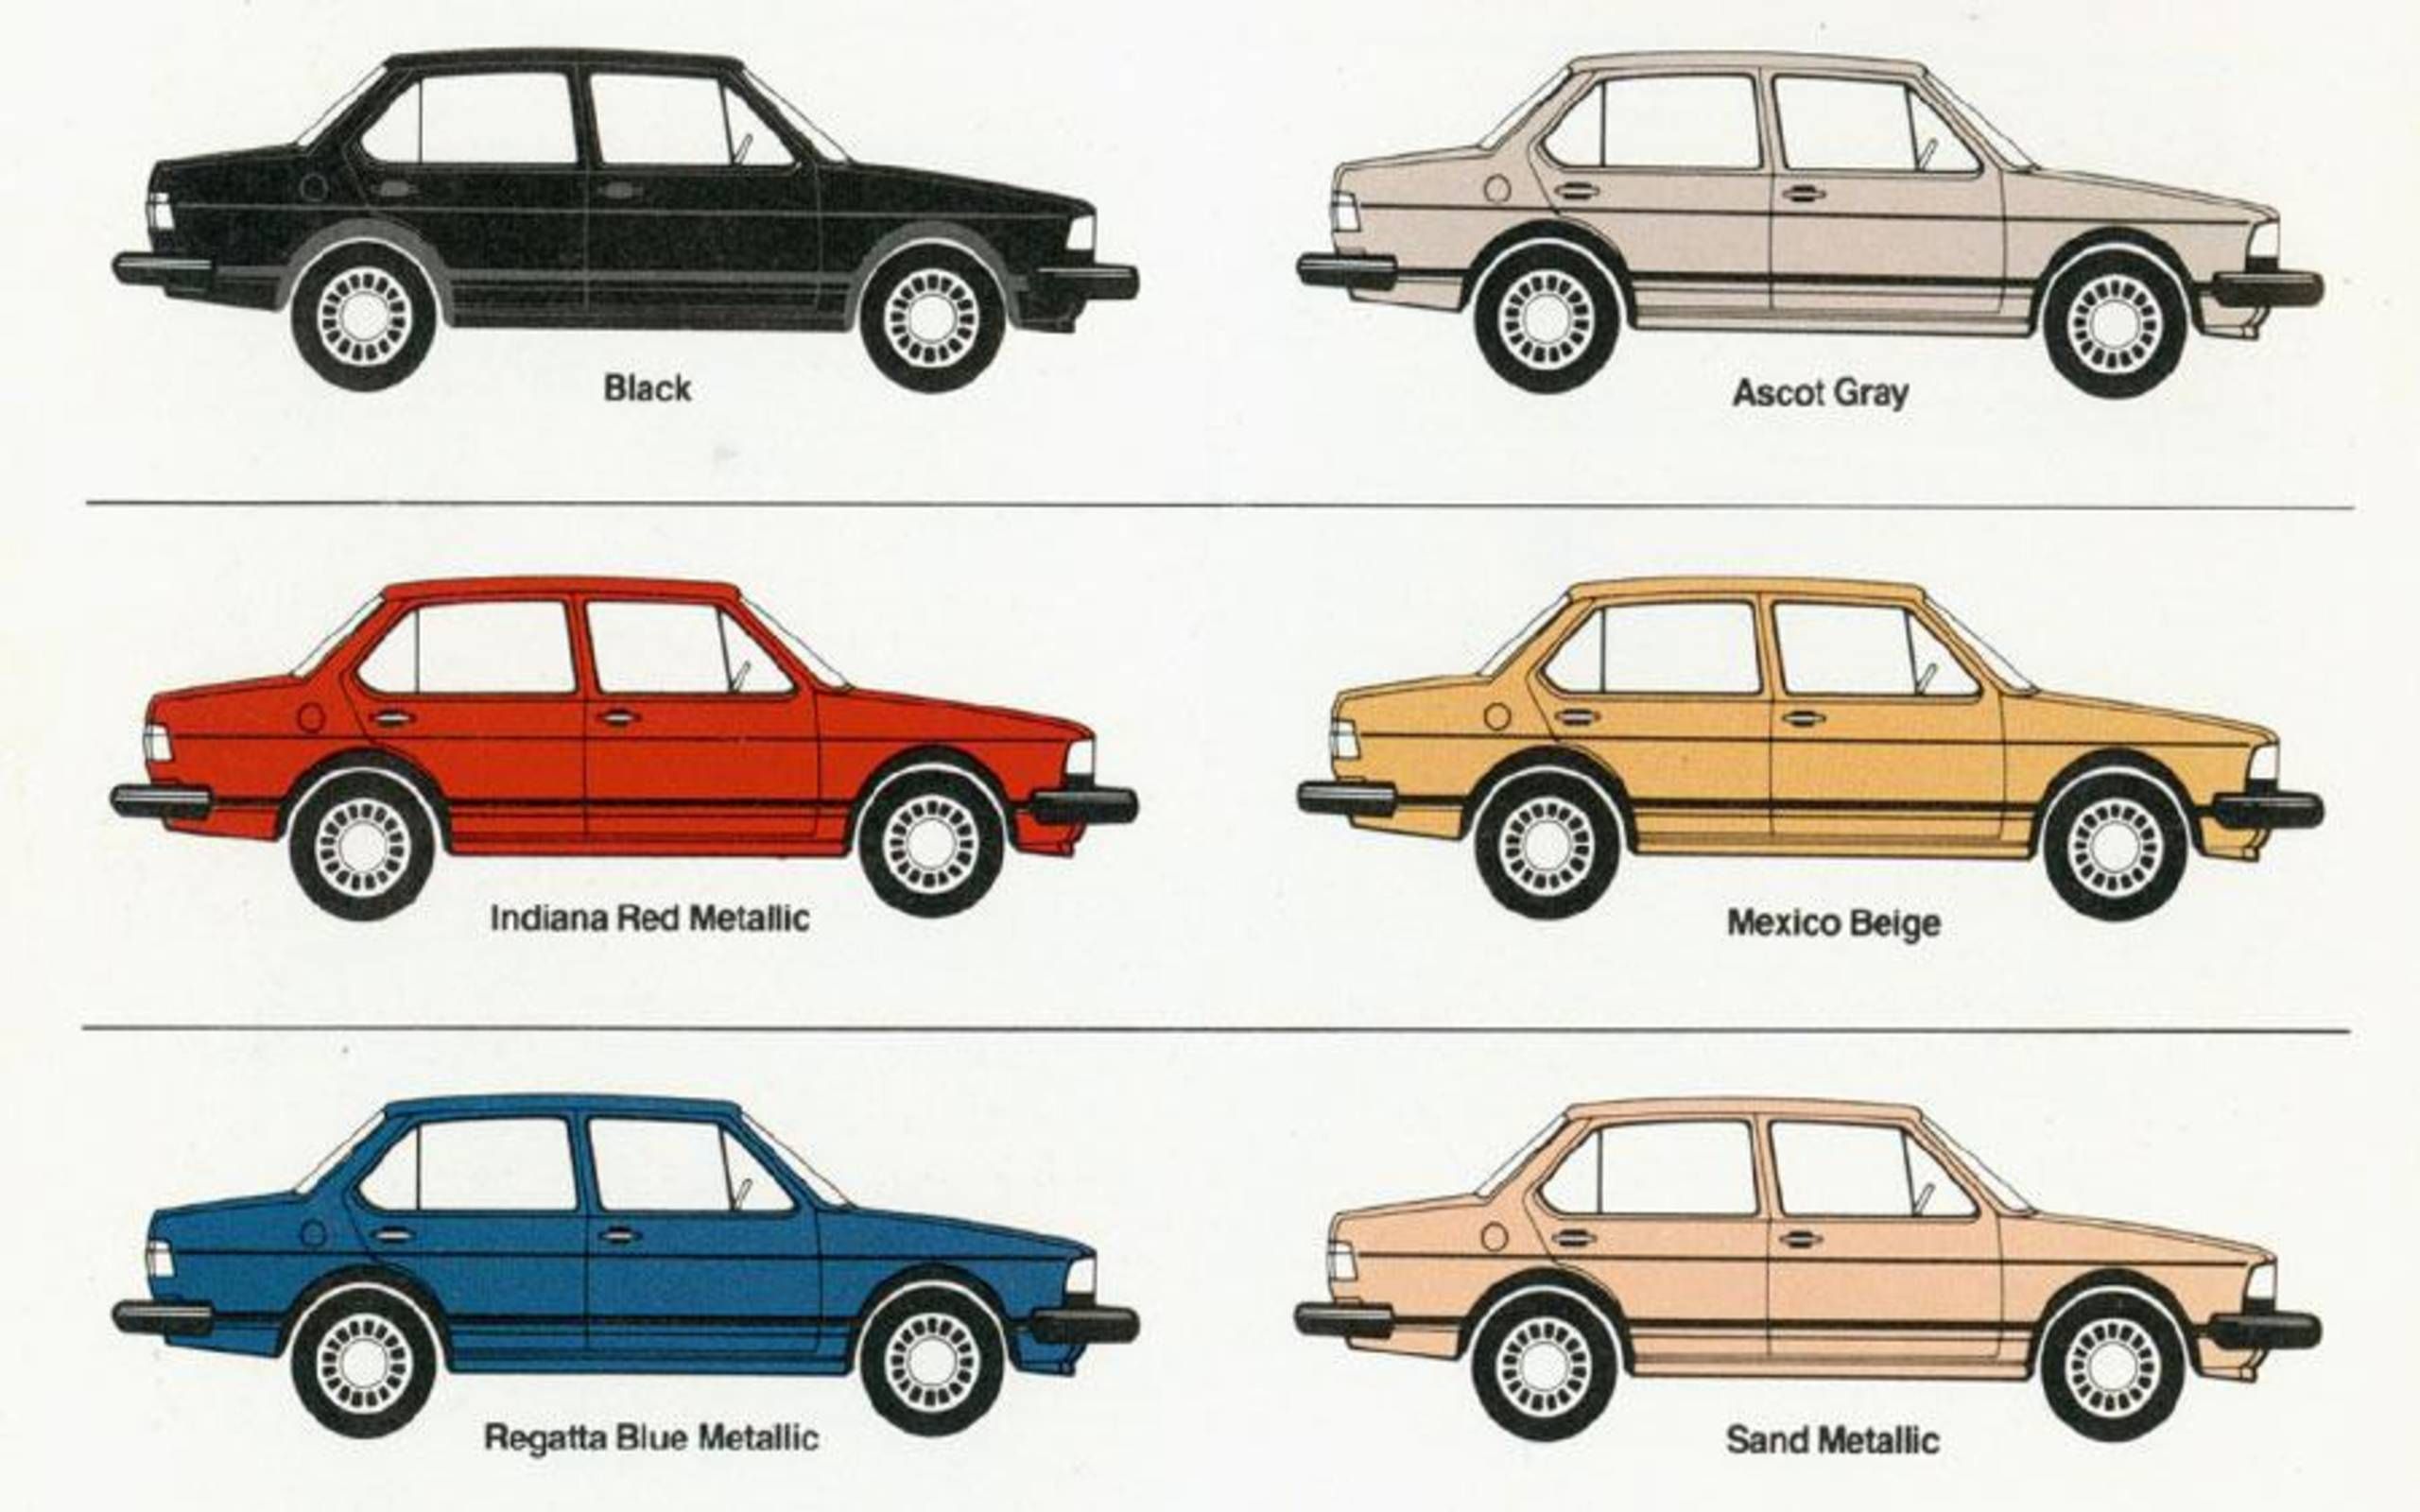 Start shopping for your 1981 VW Jetta with this vintage brochure